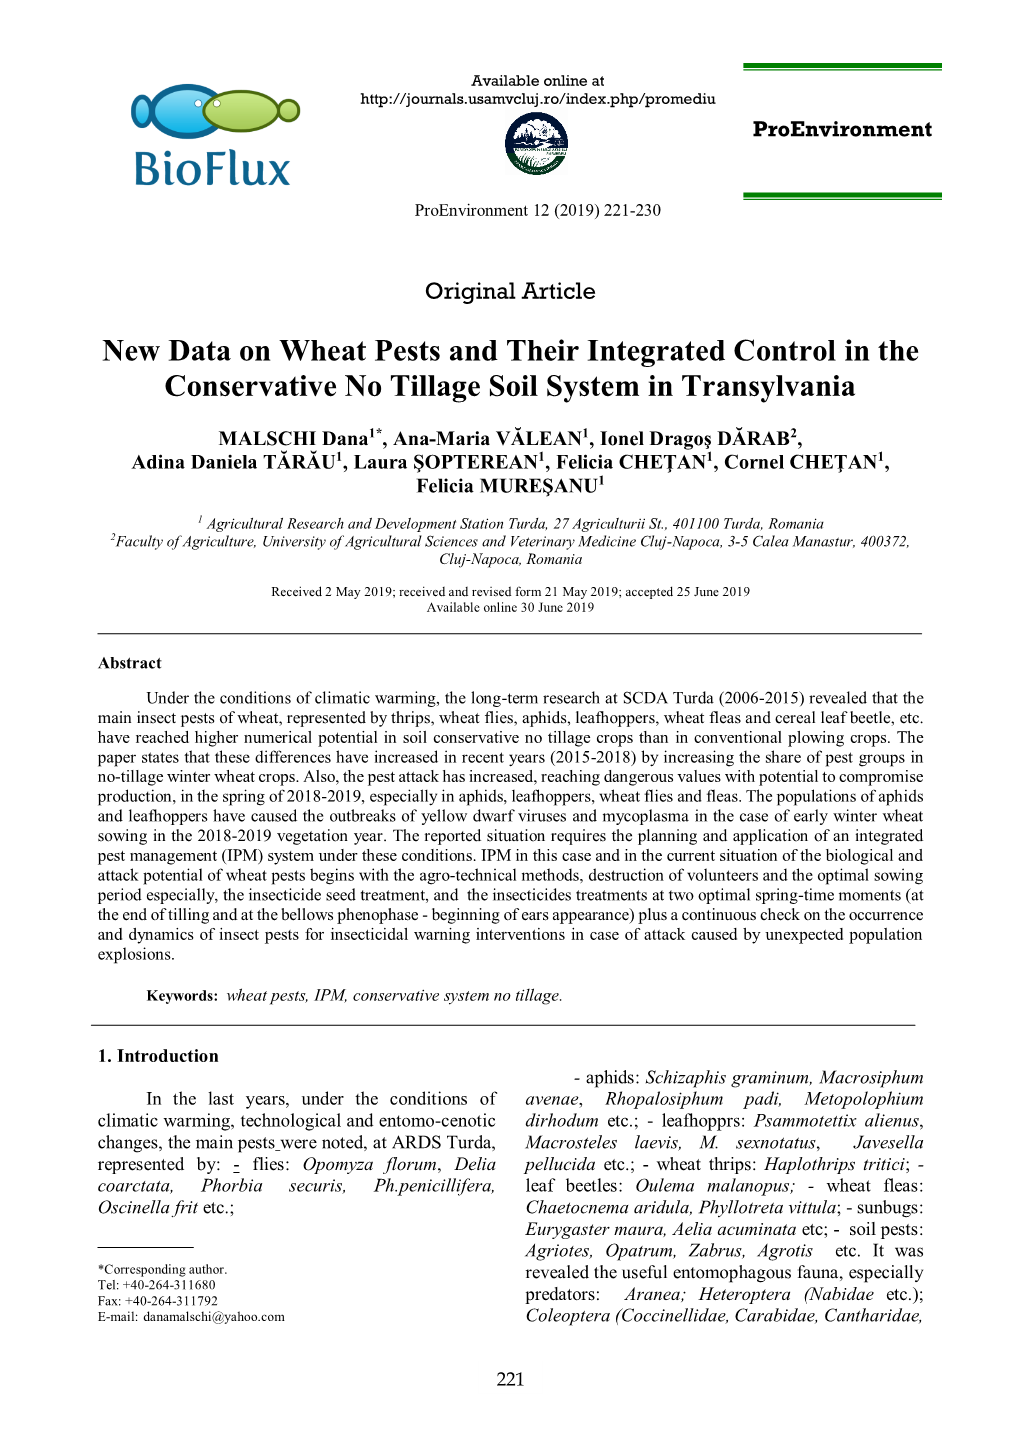 New Data on Wheat Pests and Their Integrated Control in the Conservative No Tillage Soil System in Transylvania